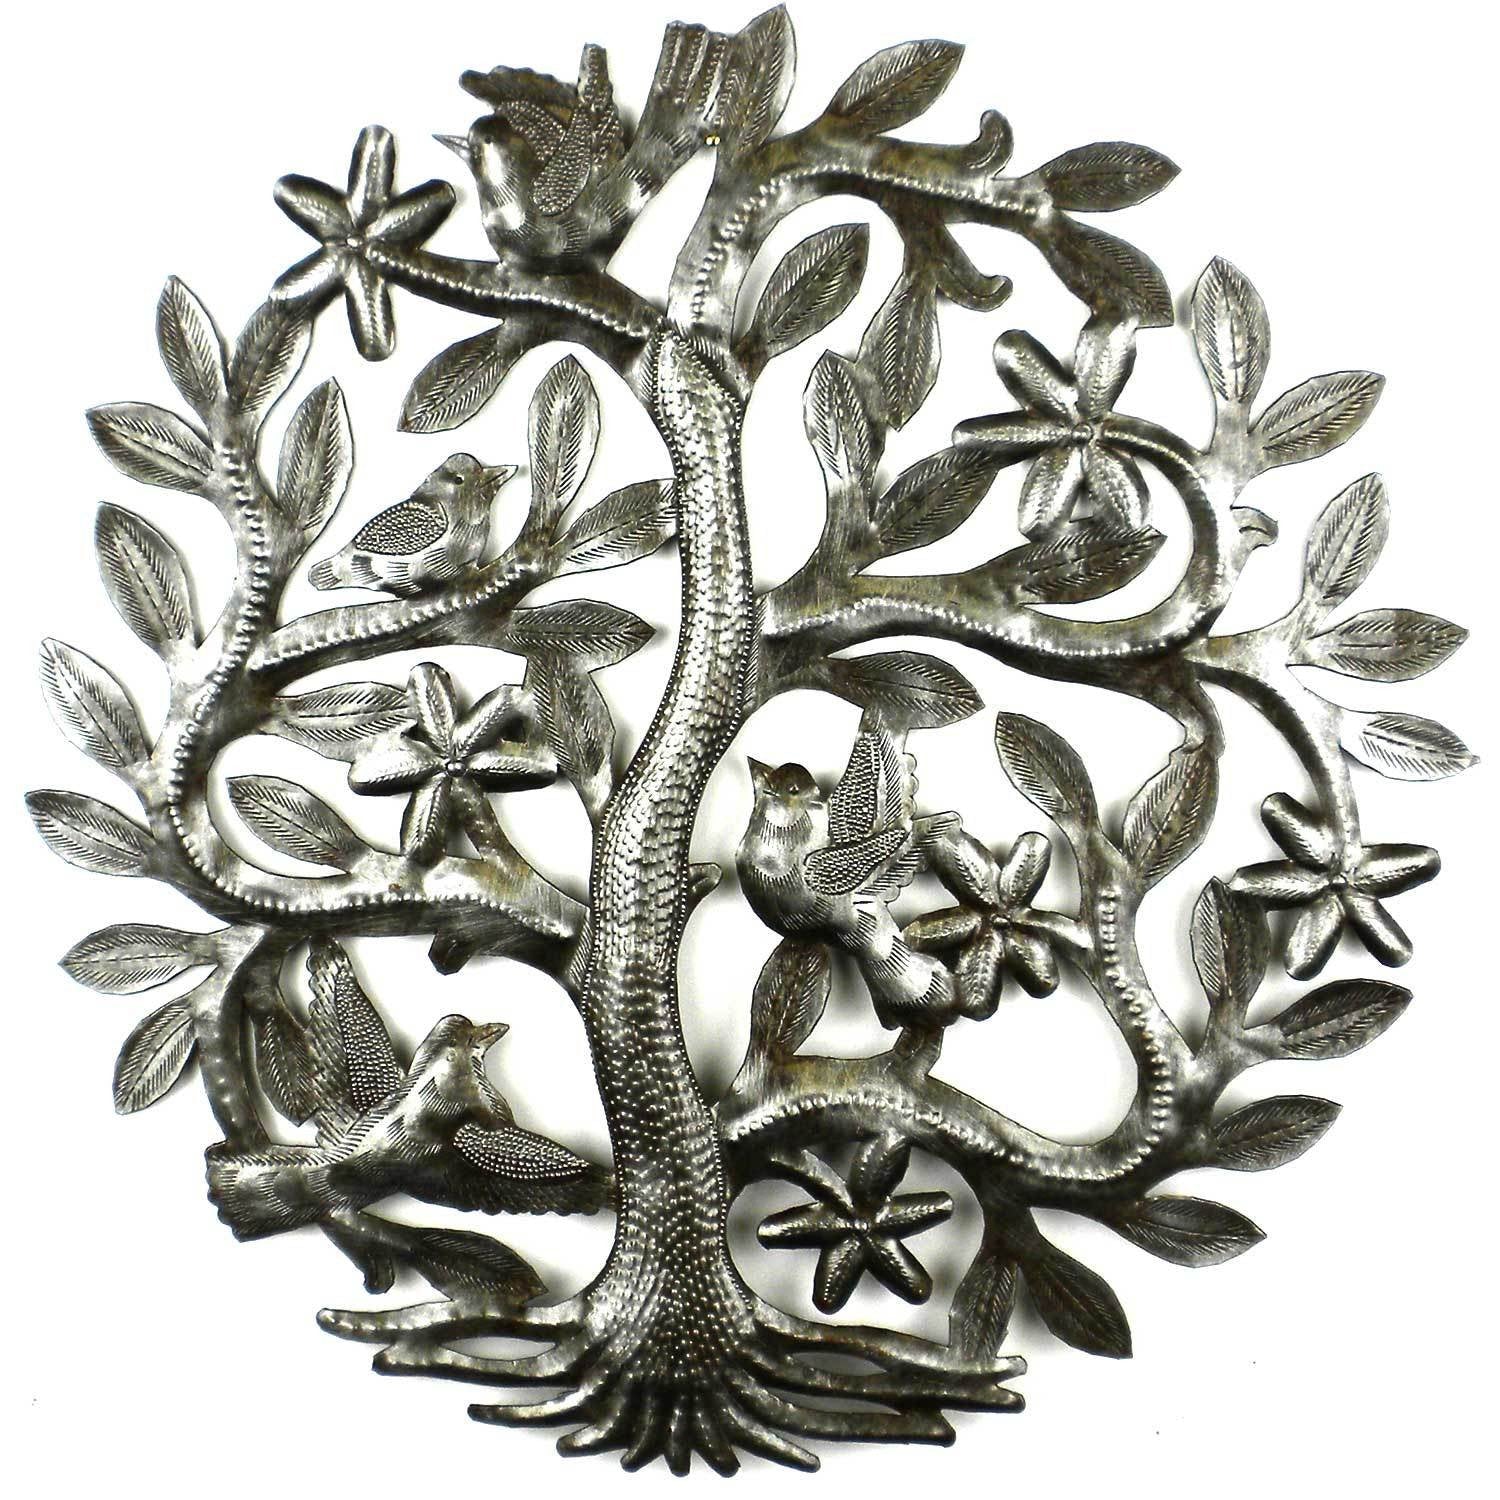 Tree of Life with Birds Steel Drum Wall Art, 14" - Croix des Bouquets - Linda Kay Gifford’s - Those Nasty Women TALK! by SWEETSurvivor